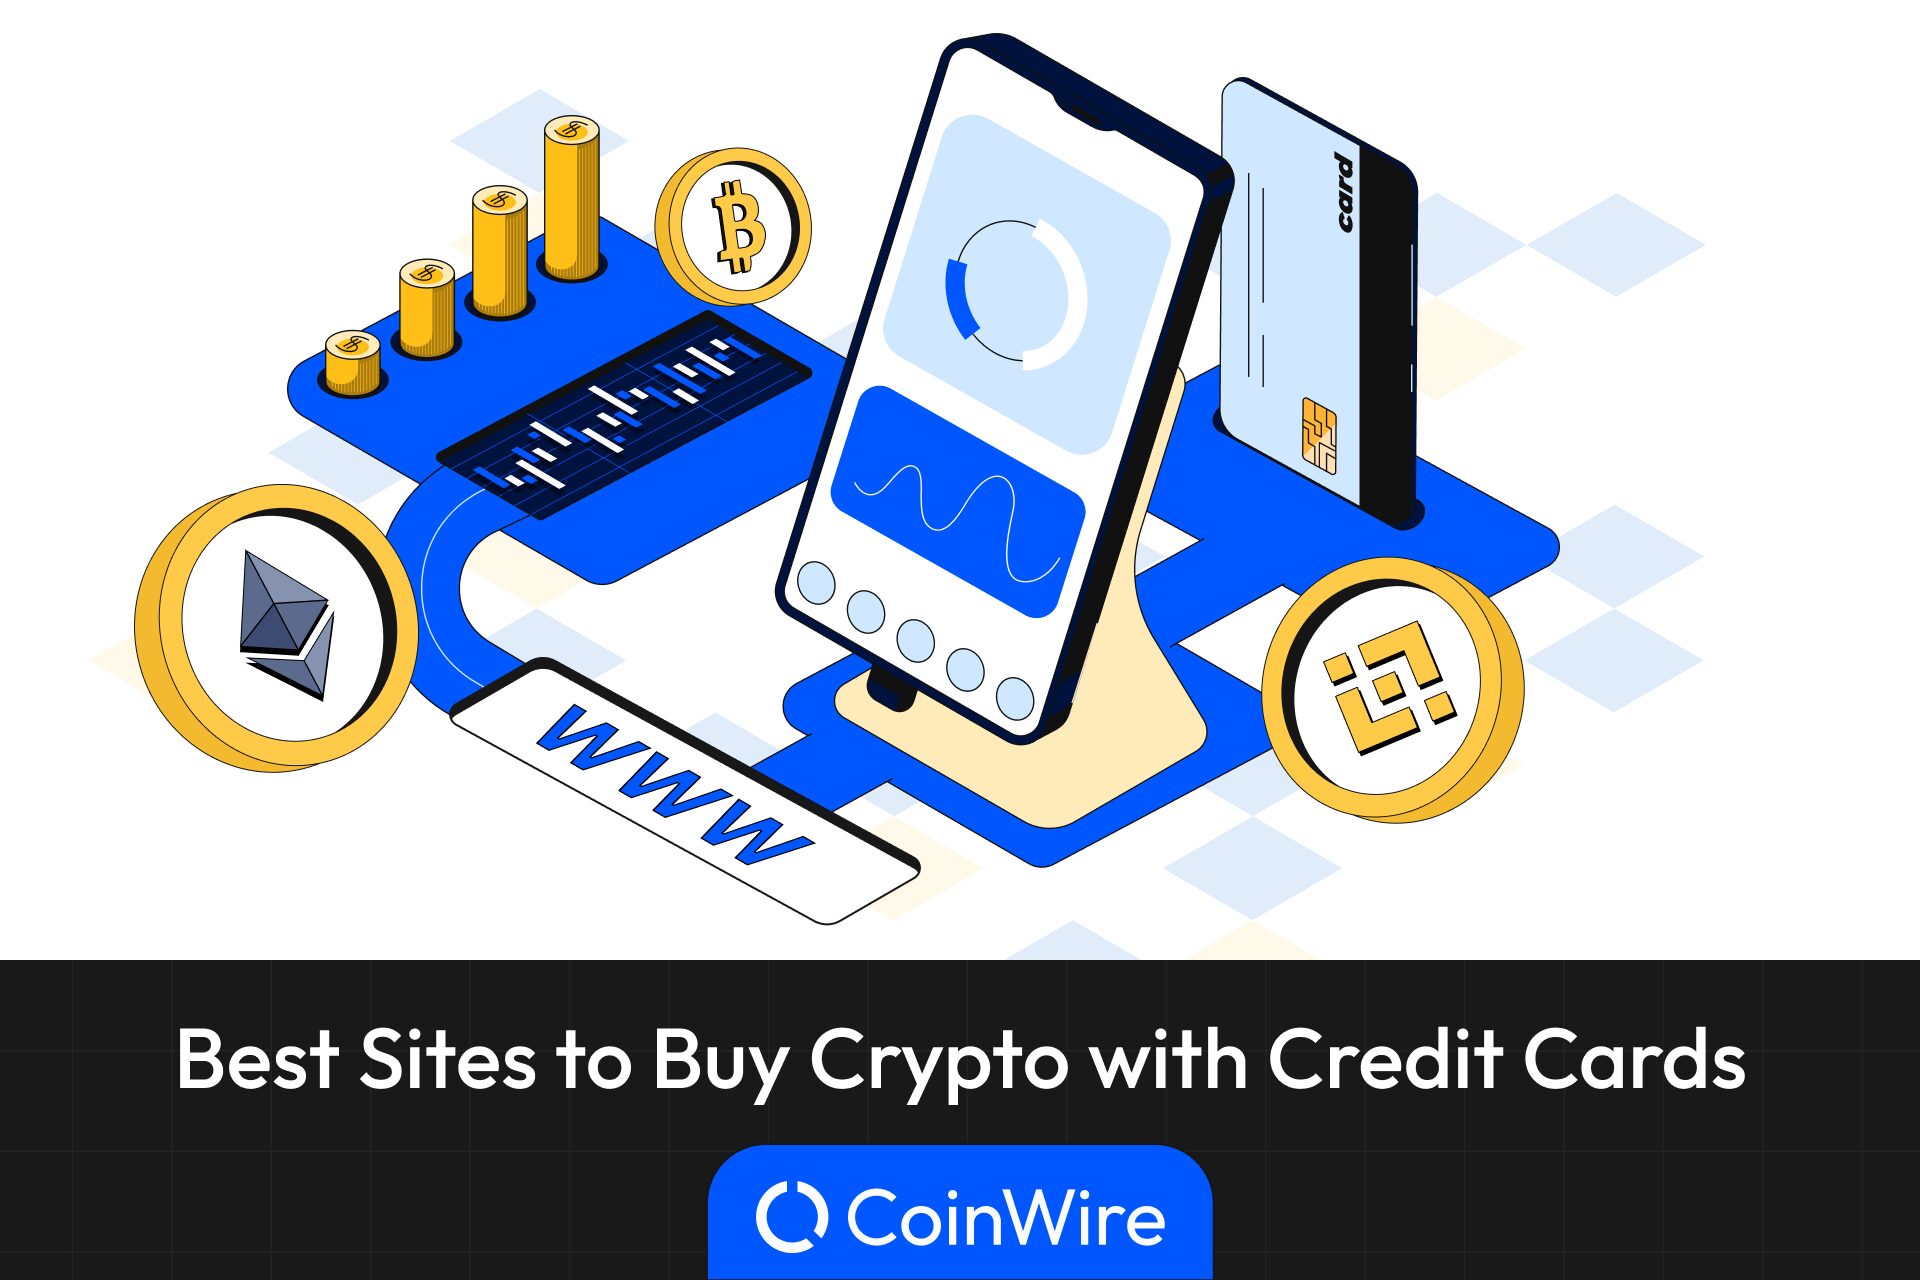 How to Buy Crypto With a Credit Card in Canada?